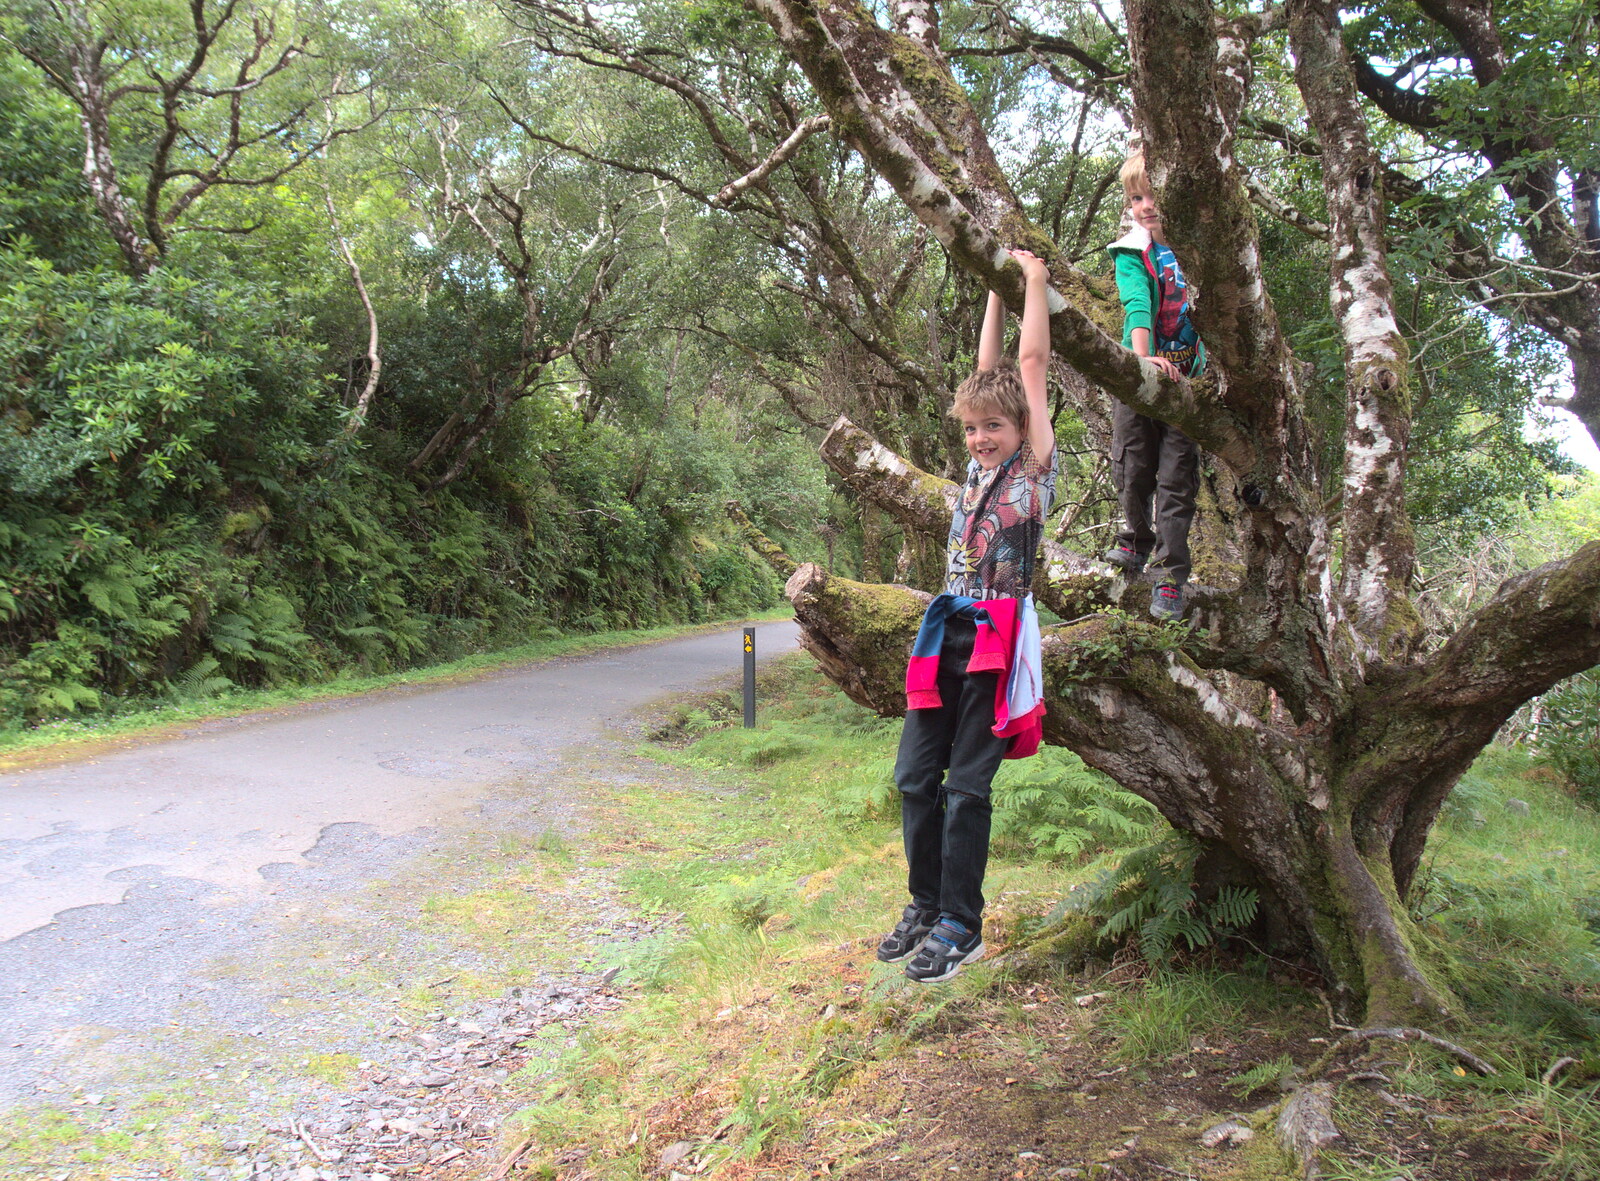 More hanging around from A Bike Ride to Mulranny, County Mayo, Ireland - 9th August 2017